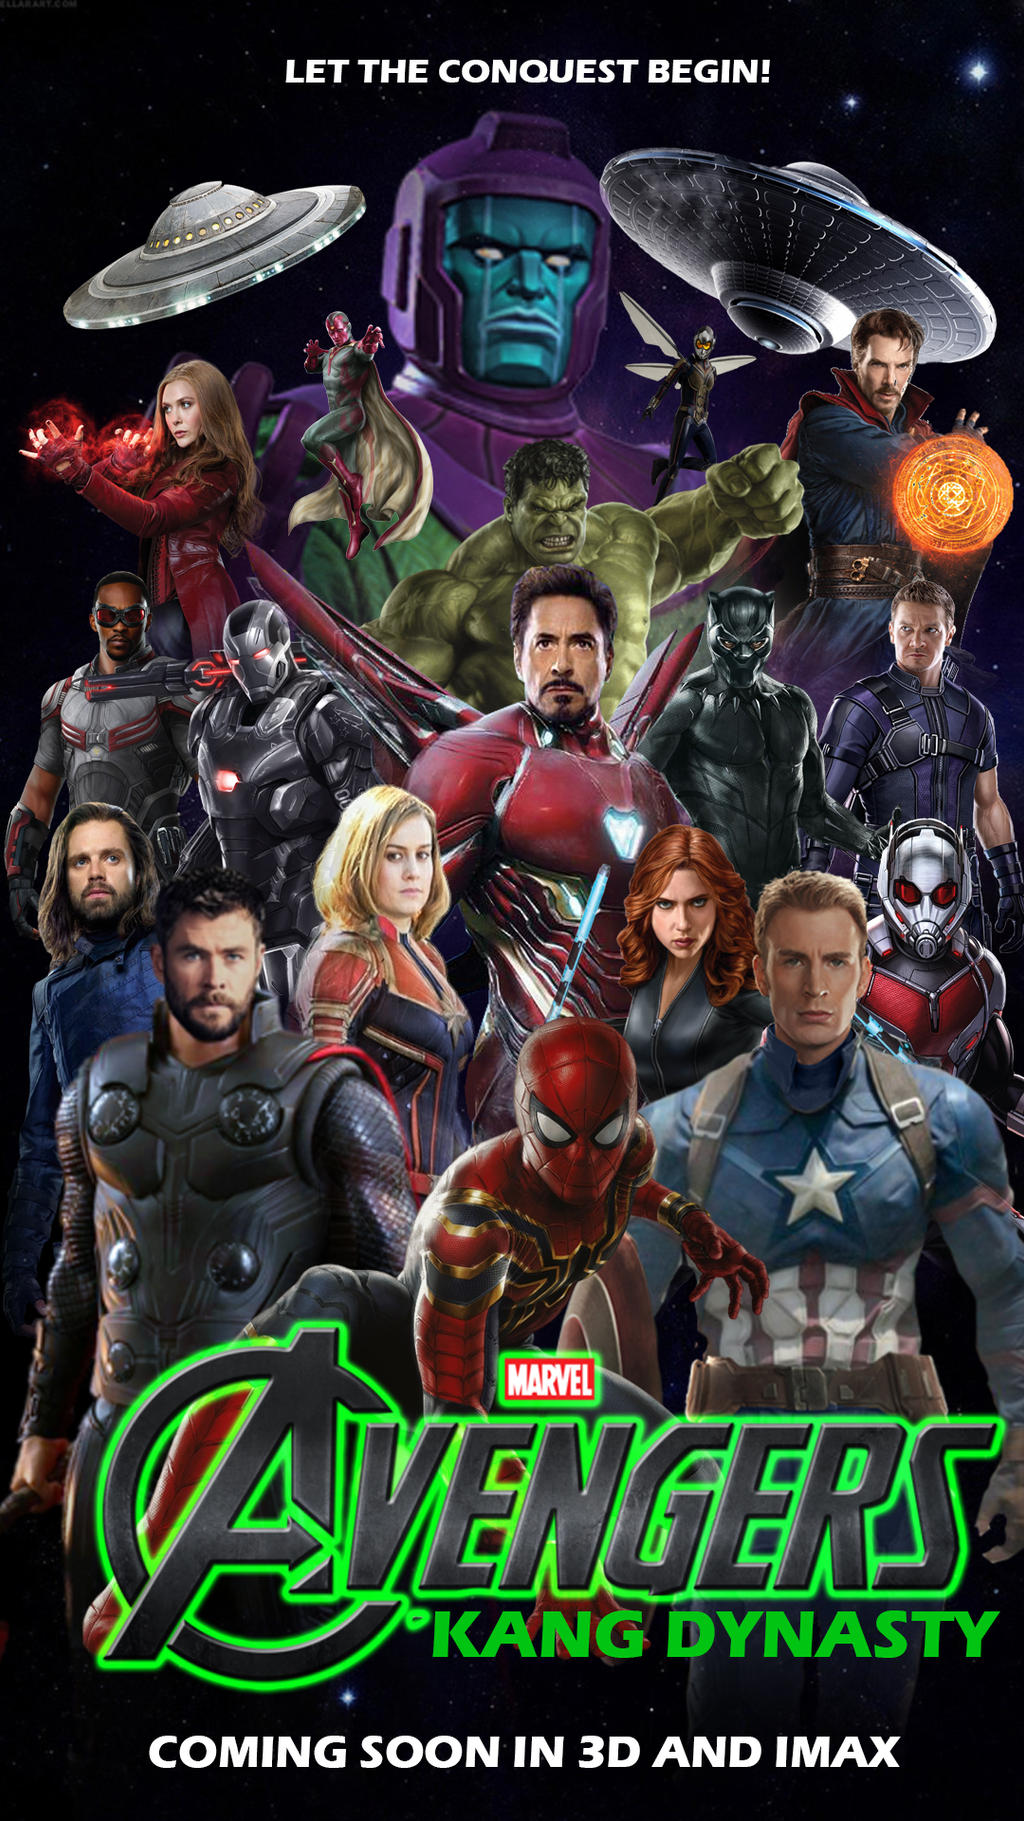 Avengers The Kang Dynasty Poster by xXMCUFan2020Xx on DeviantArt